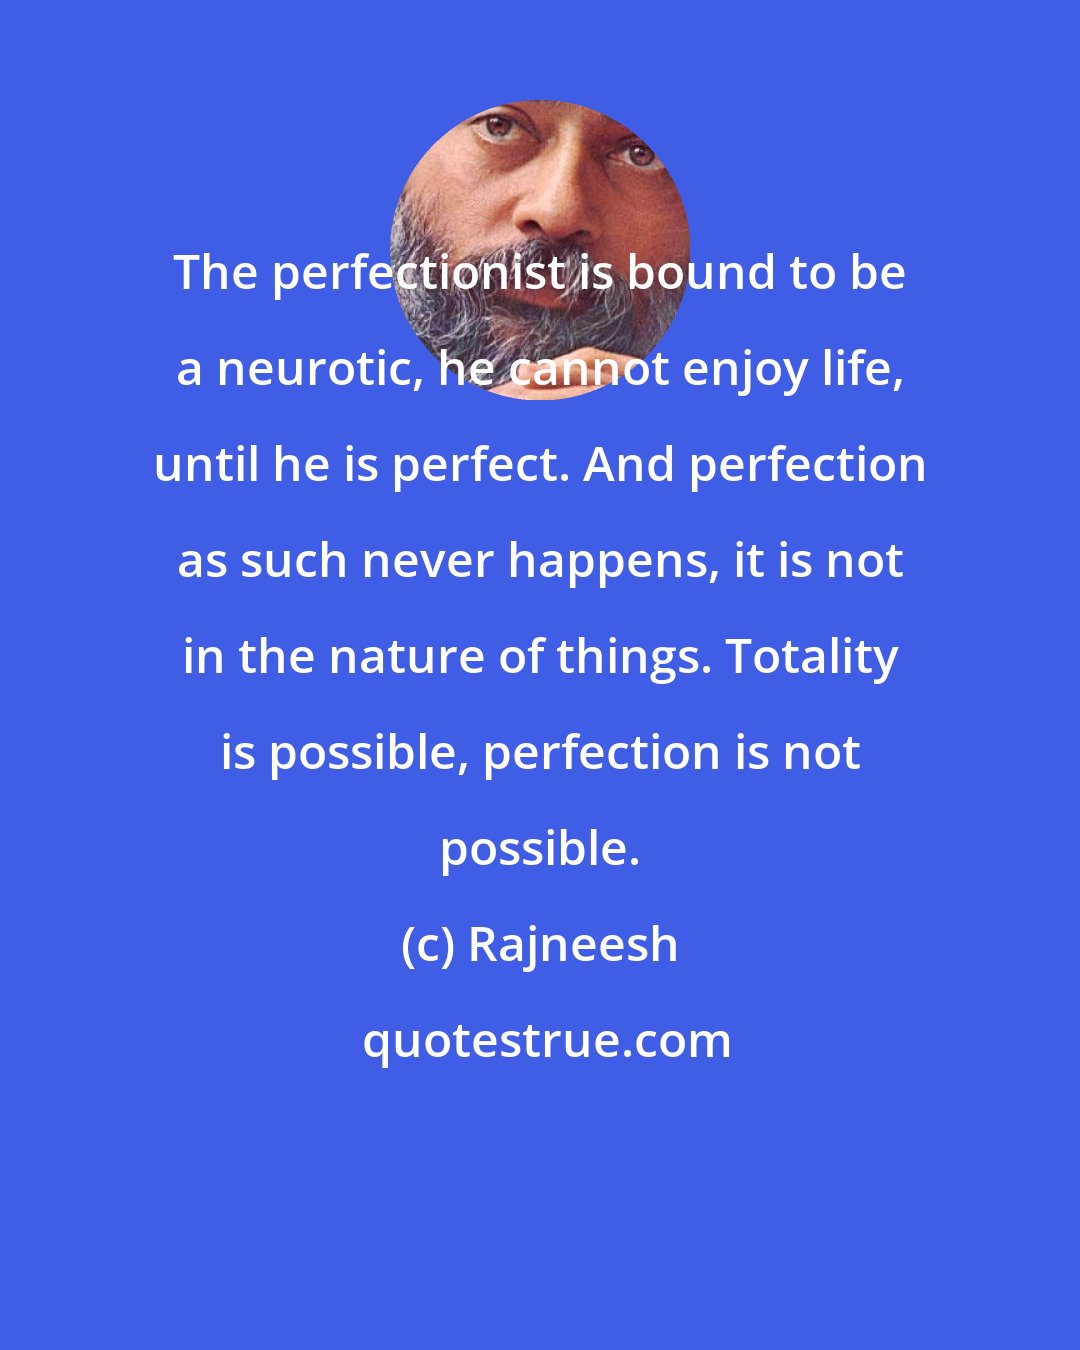 Rajneesh: The perfectionist is bound to be a neurotic, he cannot enjoy life, until he is perfect. And perfection as such never happens, it is not in the nature of things. Totality is possible, perfection is not possible.